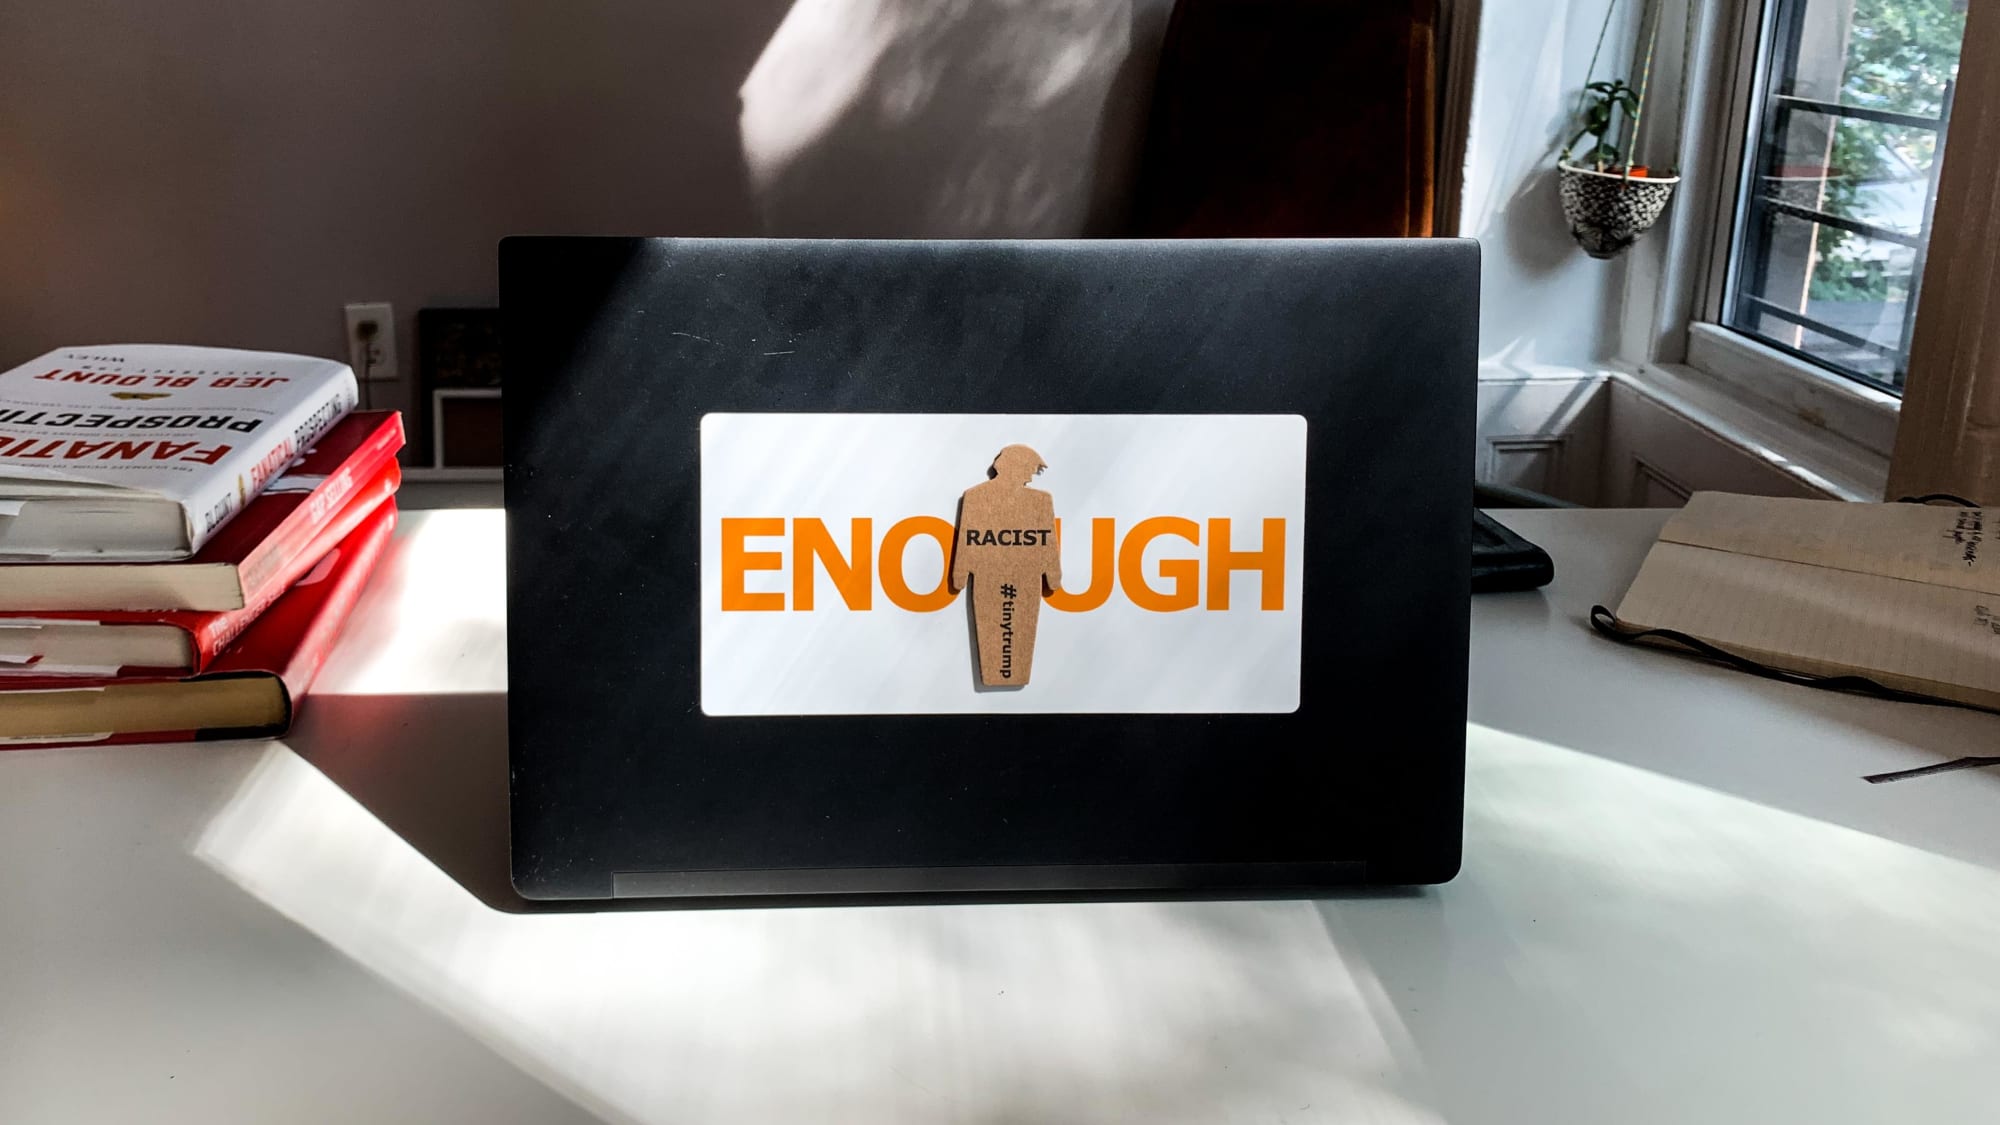 Photograph of a tiny trump ENOUGH sticker on a laptop. The tiny trump stuck in the middle bears the slogan Racist, so the combination reads ENOUGH Racist